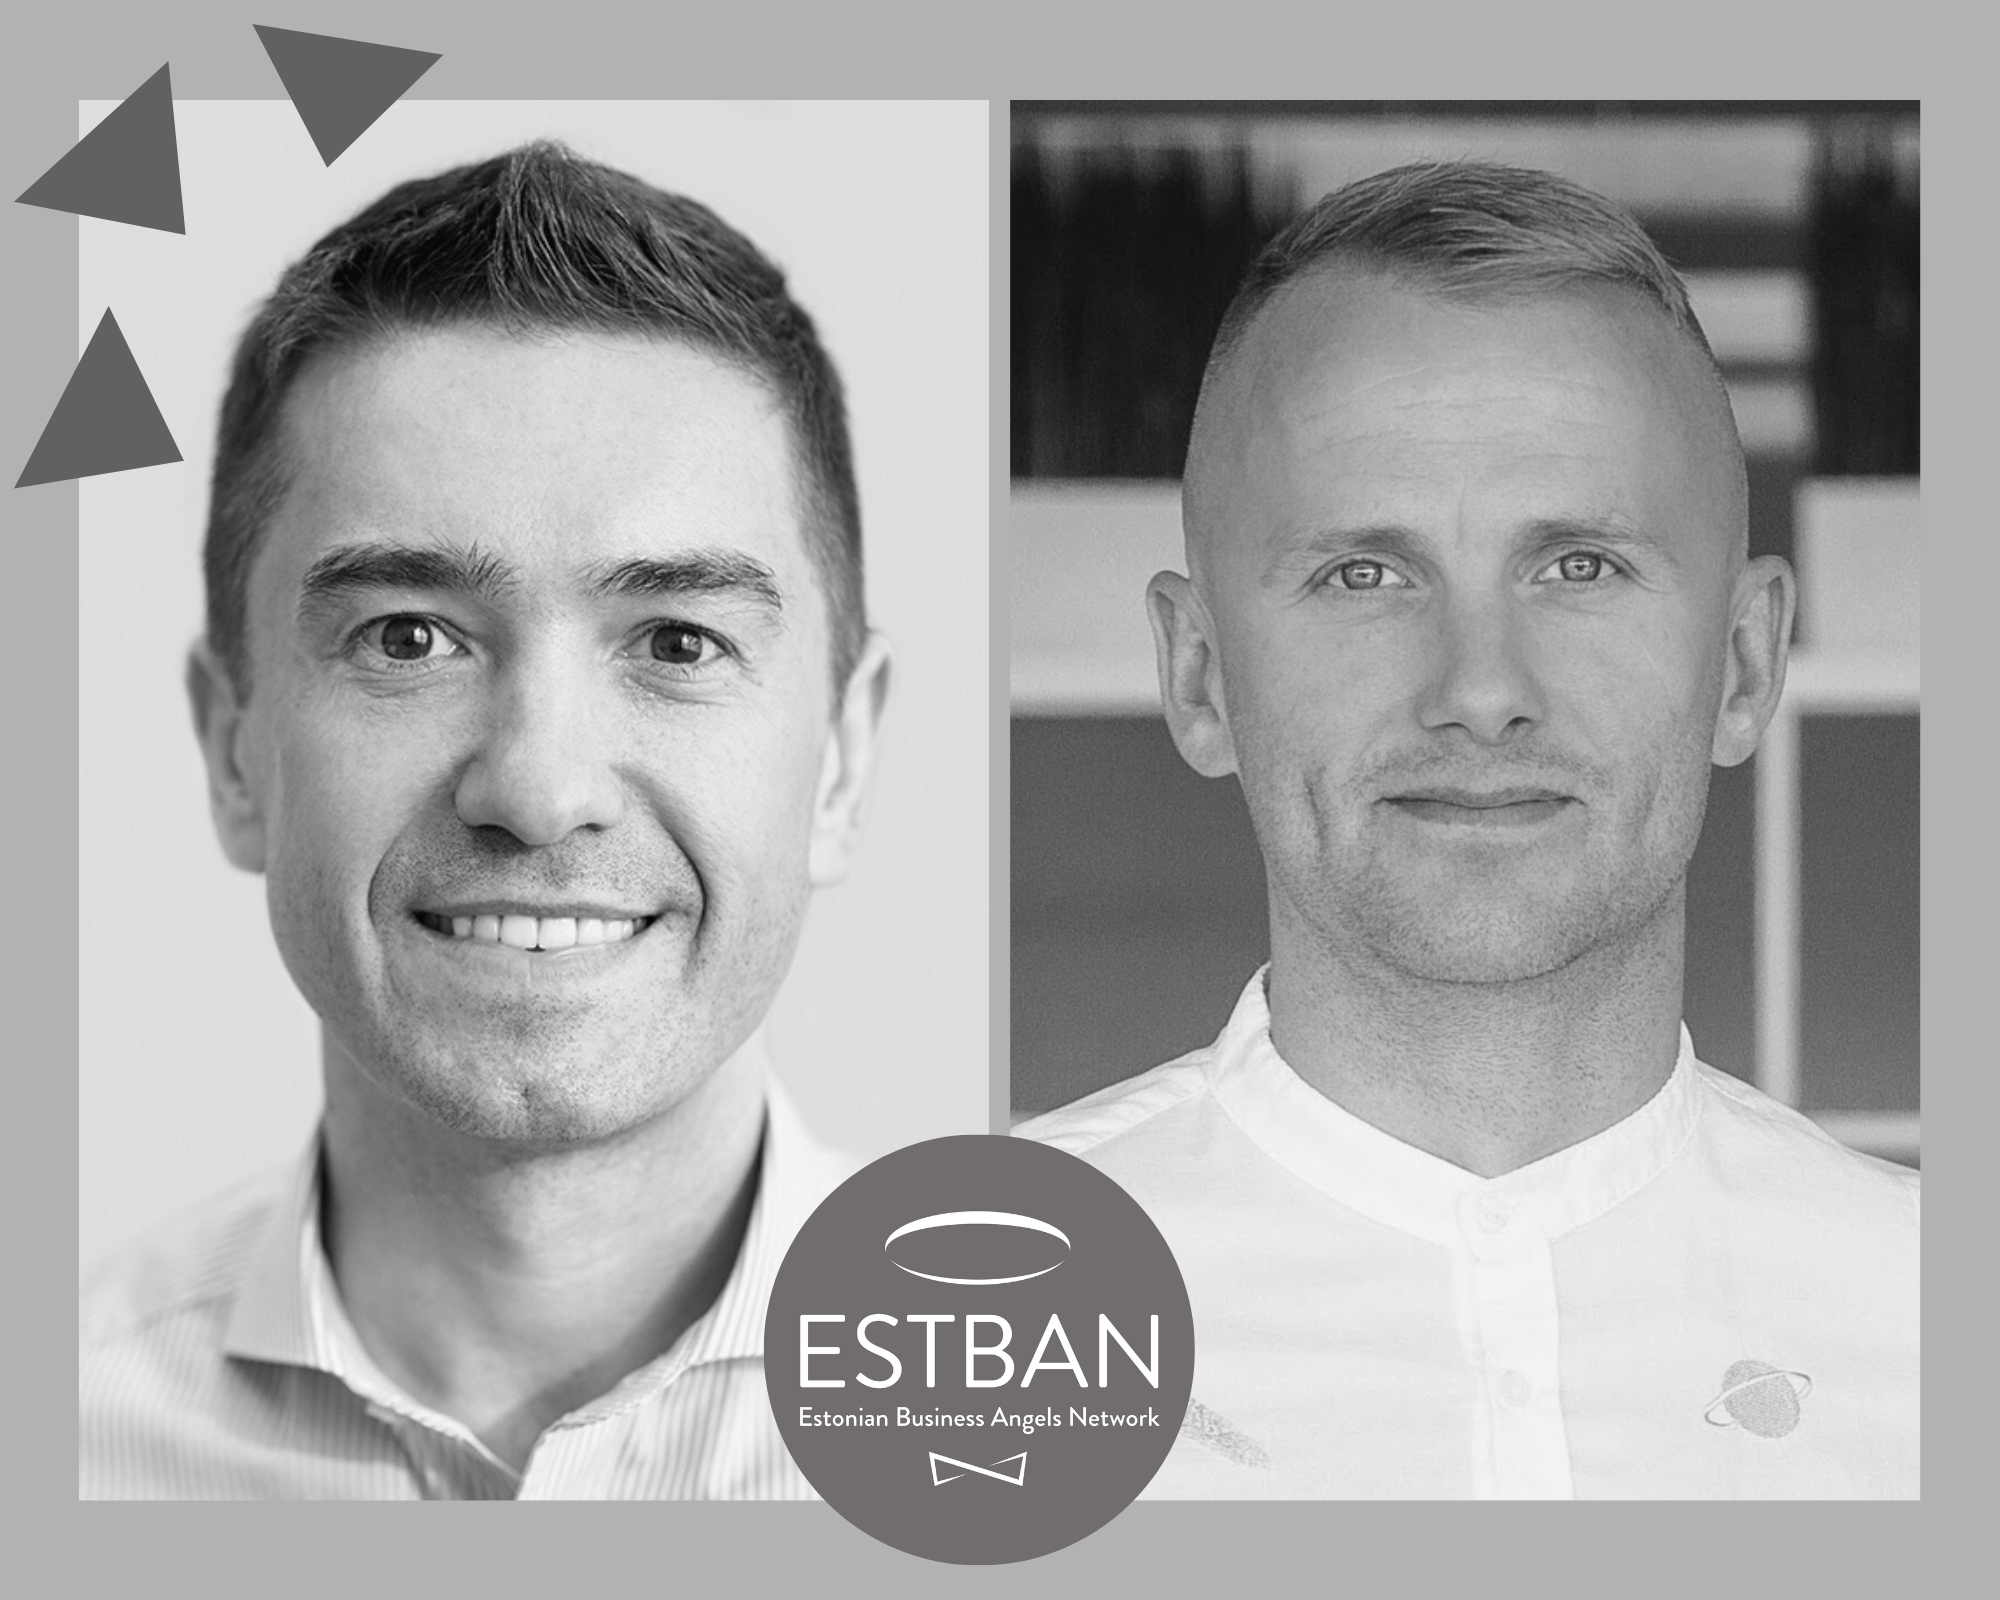 New EstBAN president will set focus on raising the awareness and benefits of angel investing